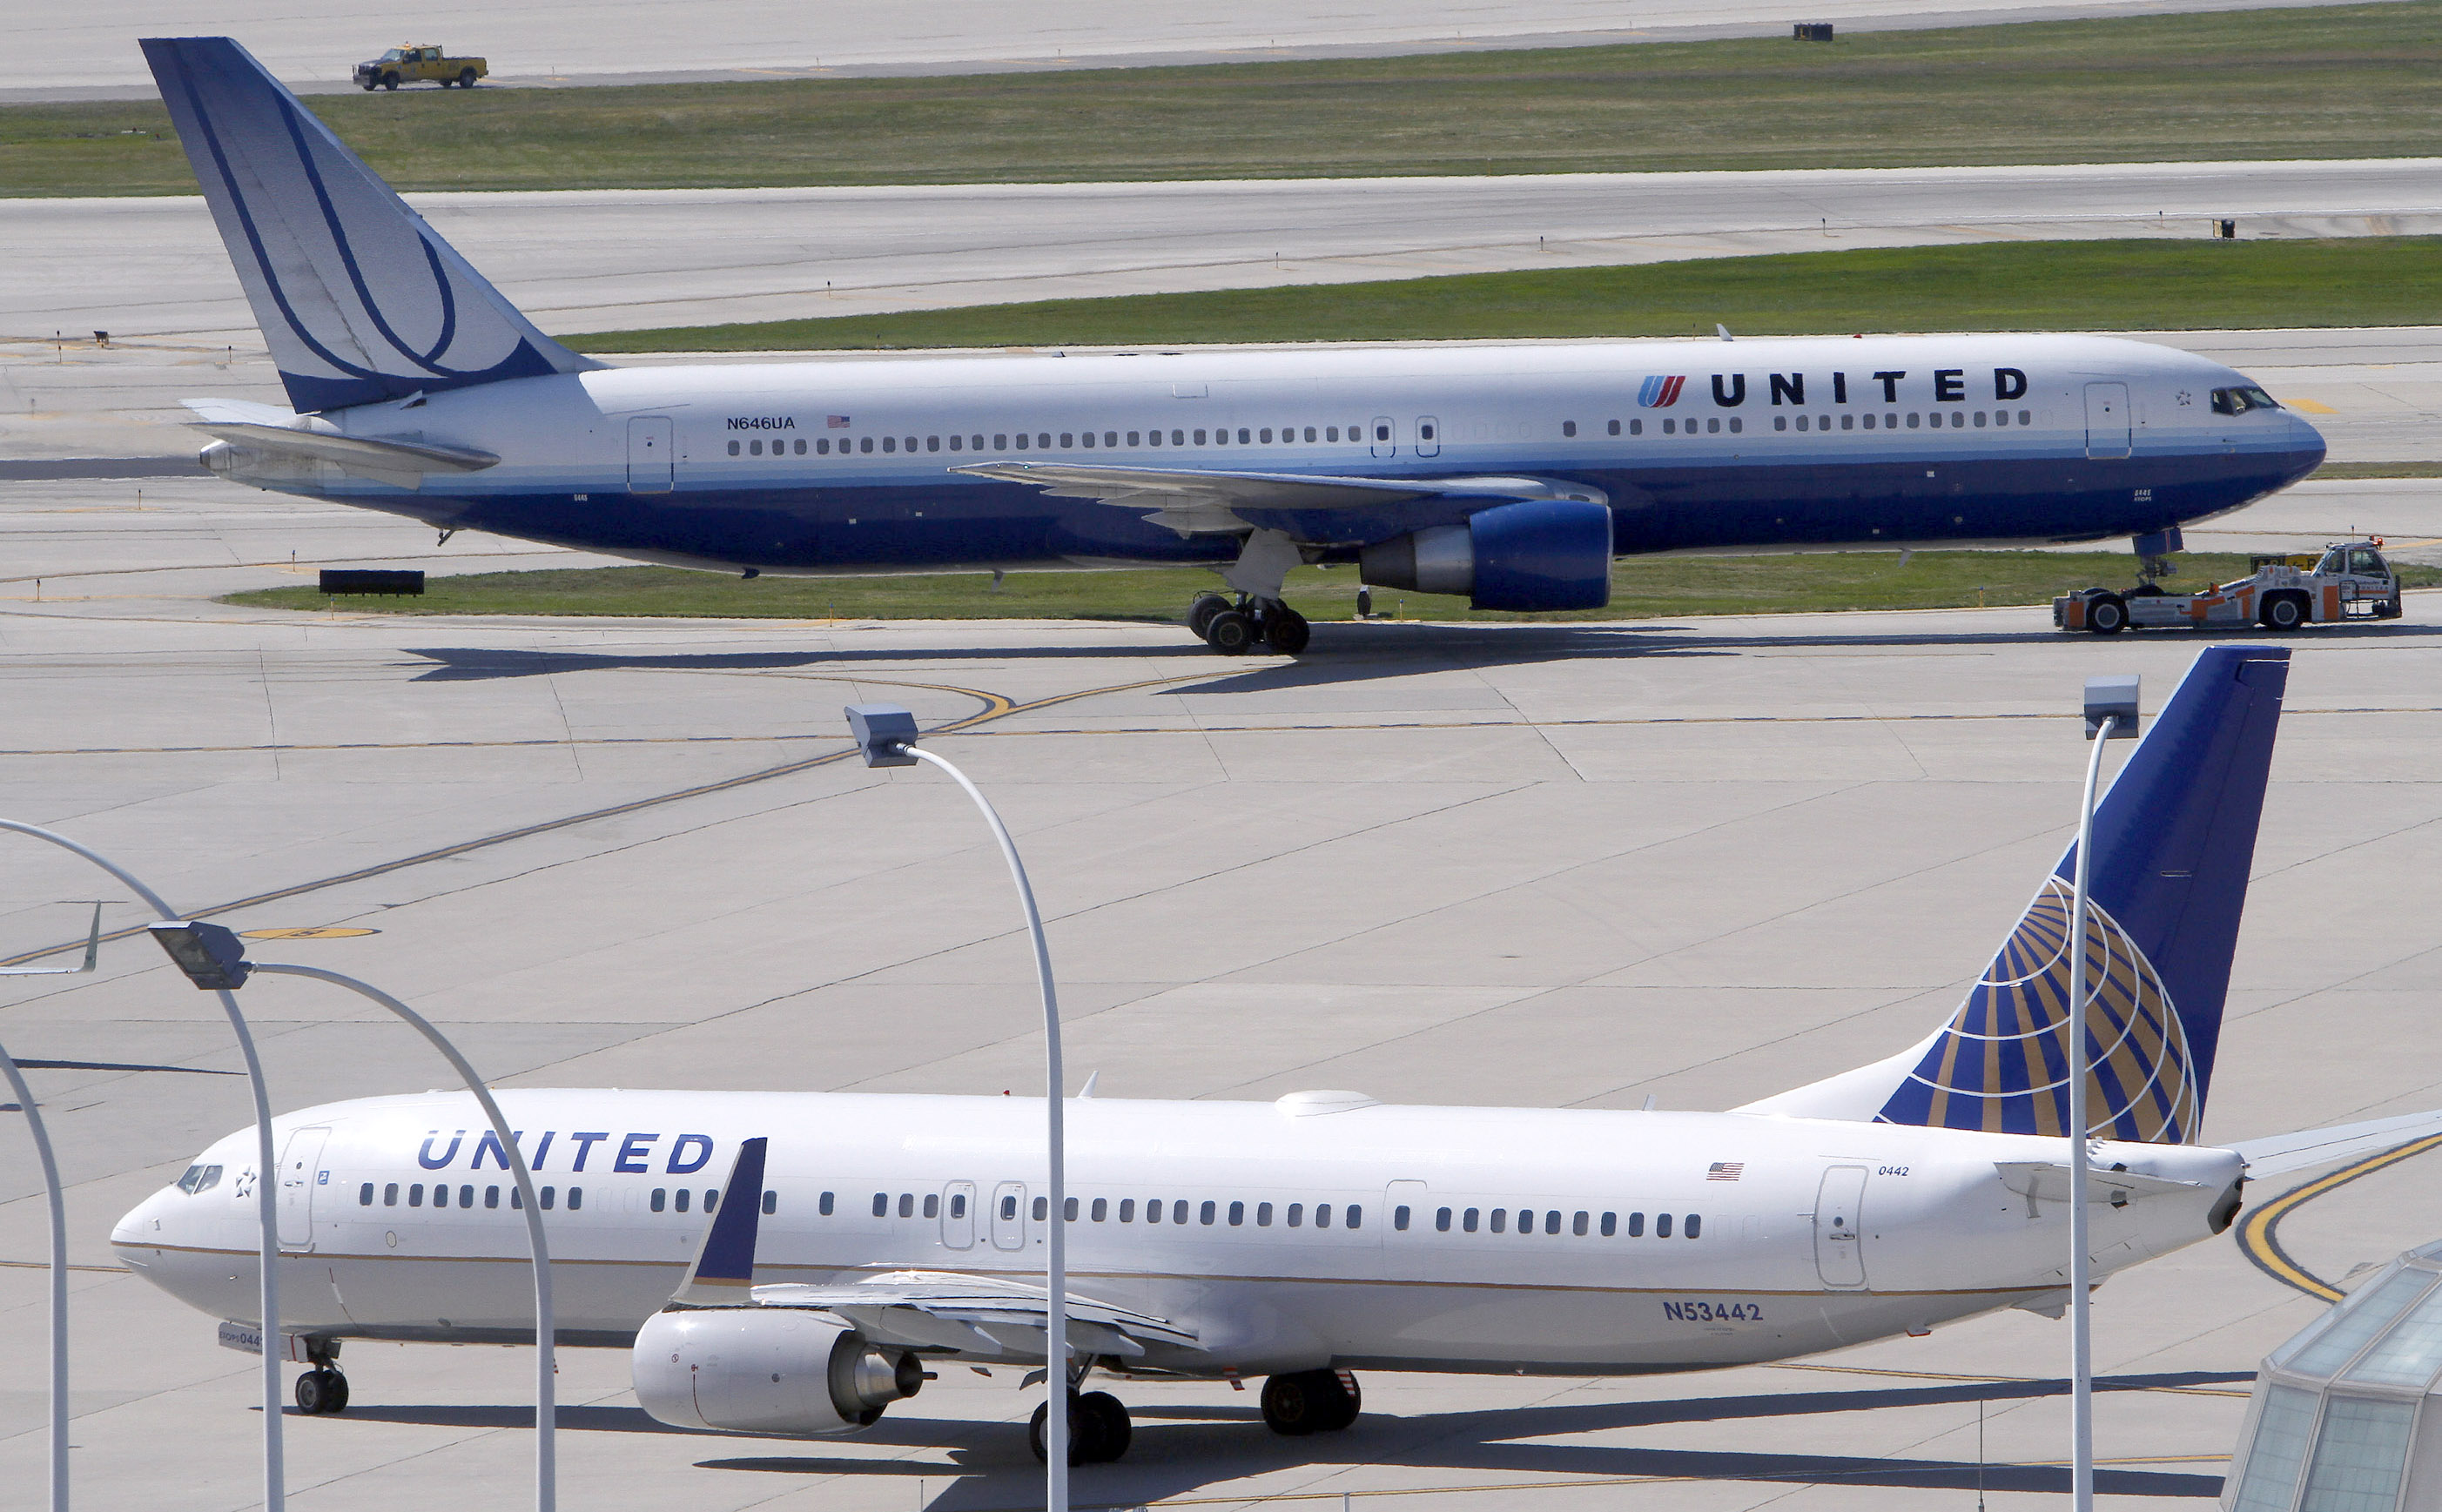 A United Airlines plane with the Continental Airlines logo on its tail, taxis to the runway while another United plane heads for the gate at O'Hare International airport in Chicago October 1, 2010. REUTERS/Frank Polich 